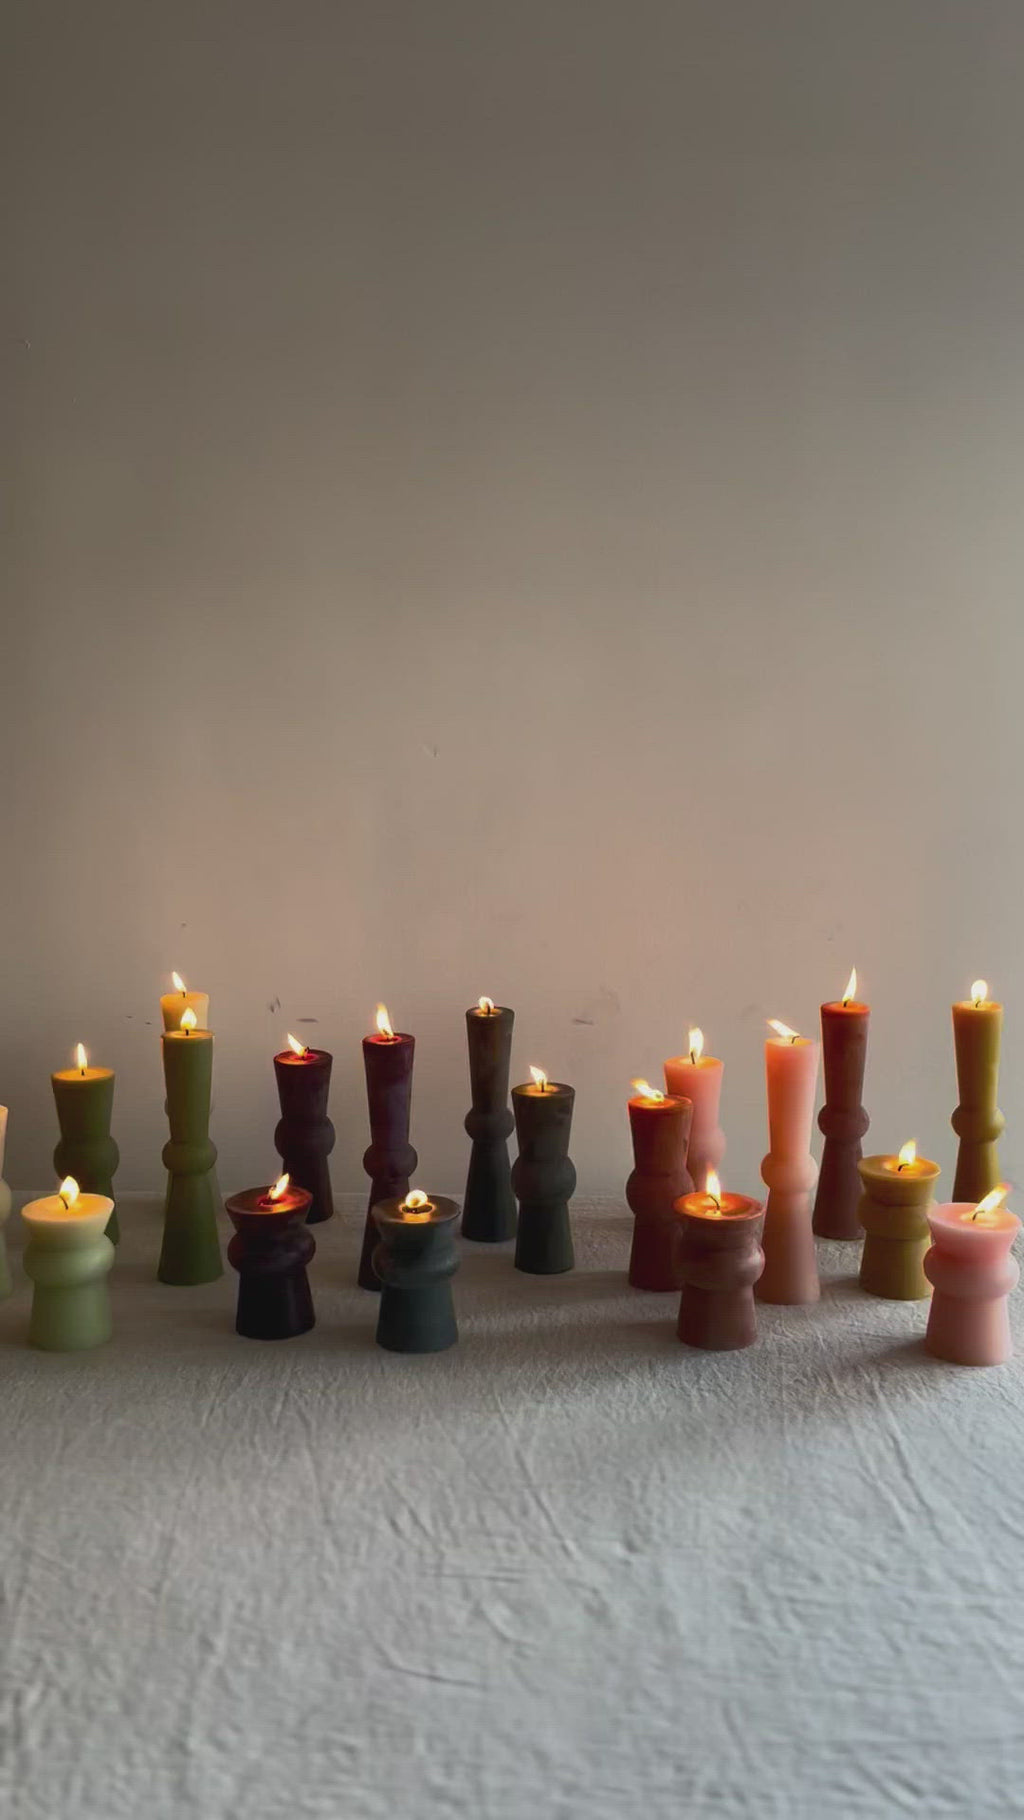 video of assorted totem candles with flames